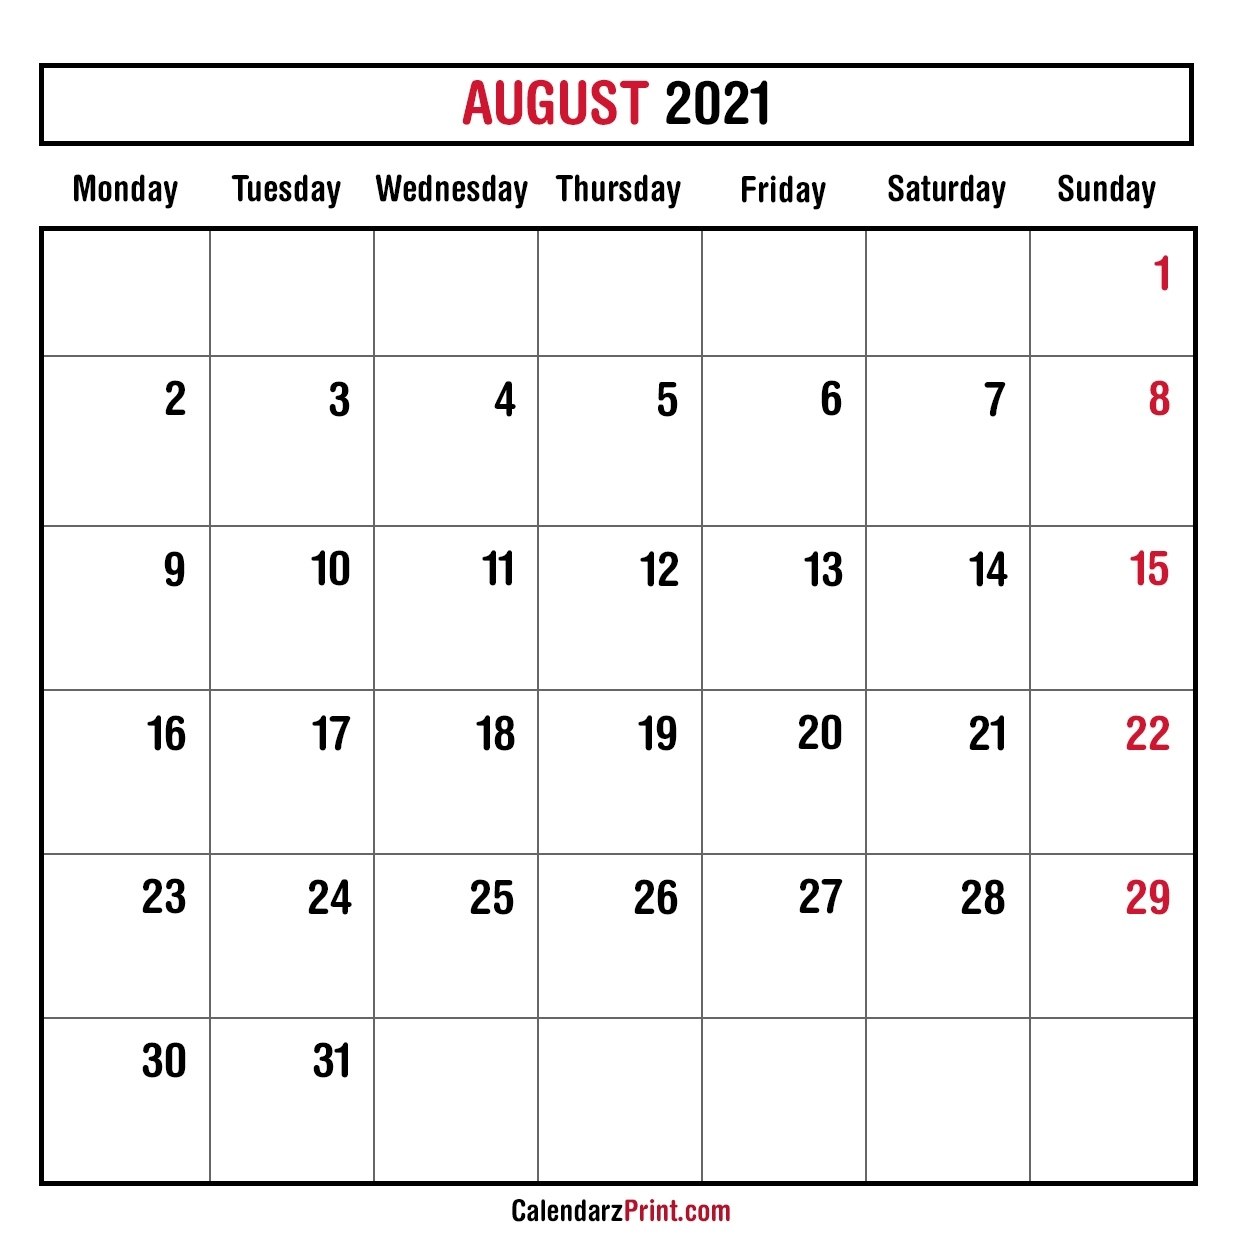 August 2021 Monthly Planner Calendar, Printable Free - Monday Start - Calendarzprint | Free August 2021 Calendar Quotes